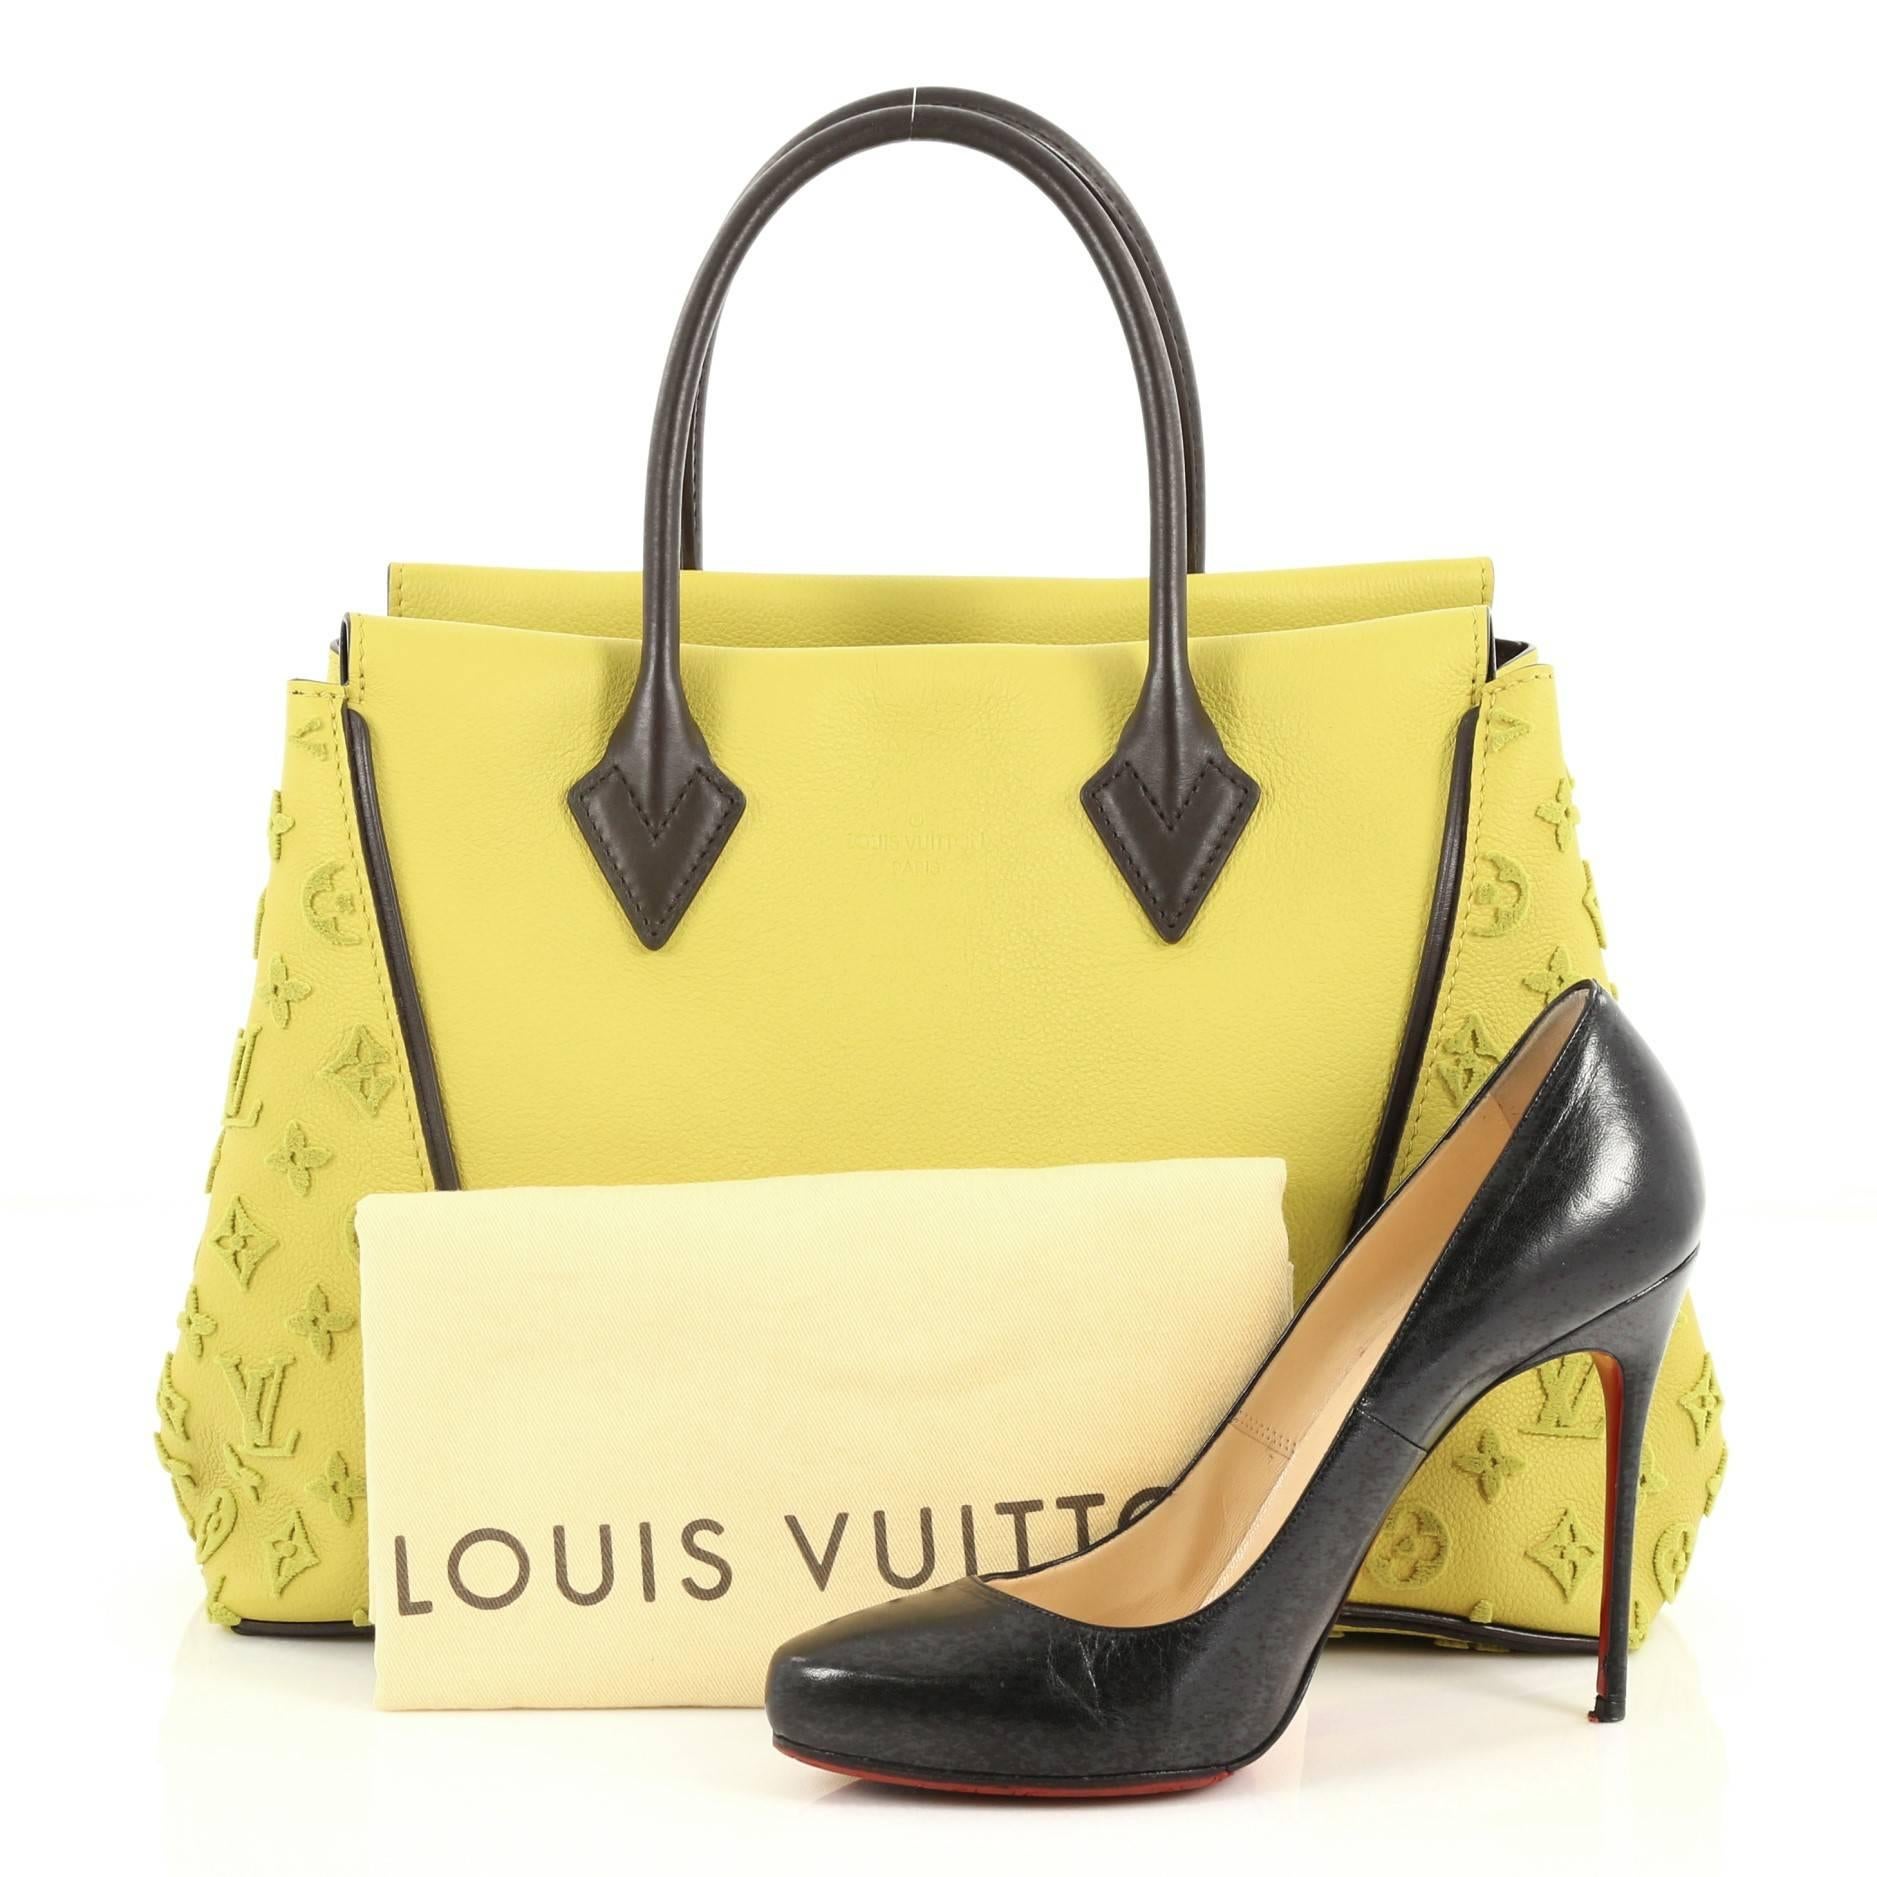 This authentic Louis Vuitton W Tote Veau Cachemire Calfskin PM is a collector's dream with an edgy and youthful design made for the modern woman. Crafted yellow veau cachemire leather, this luxurious and elegant tote features dual-rolled handles,